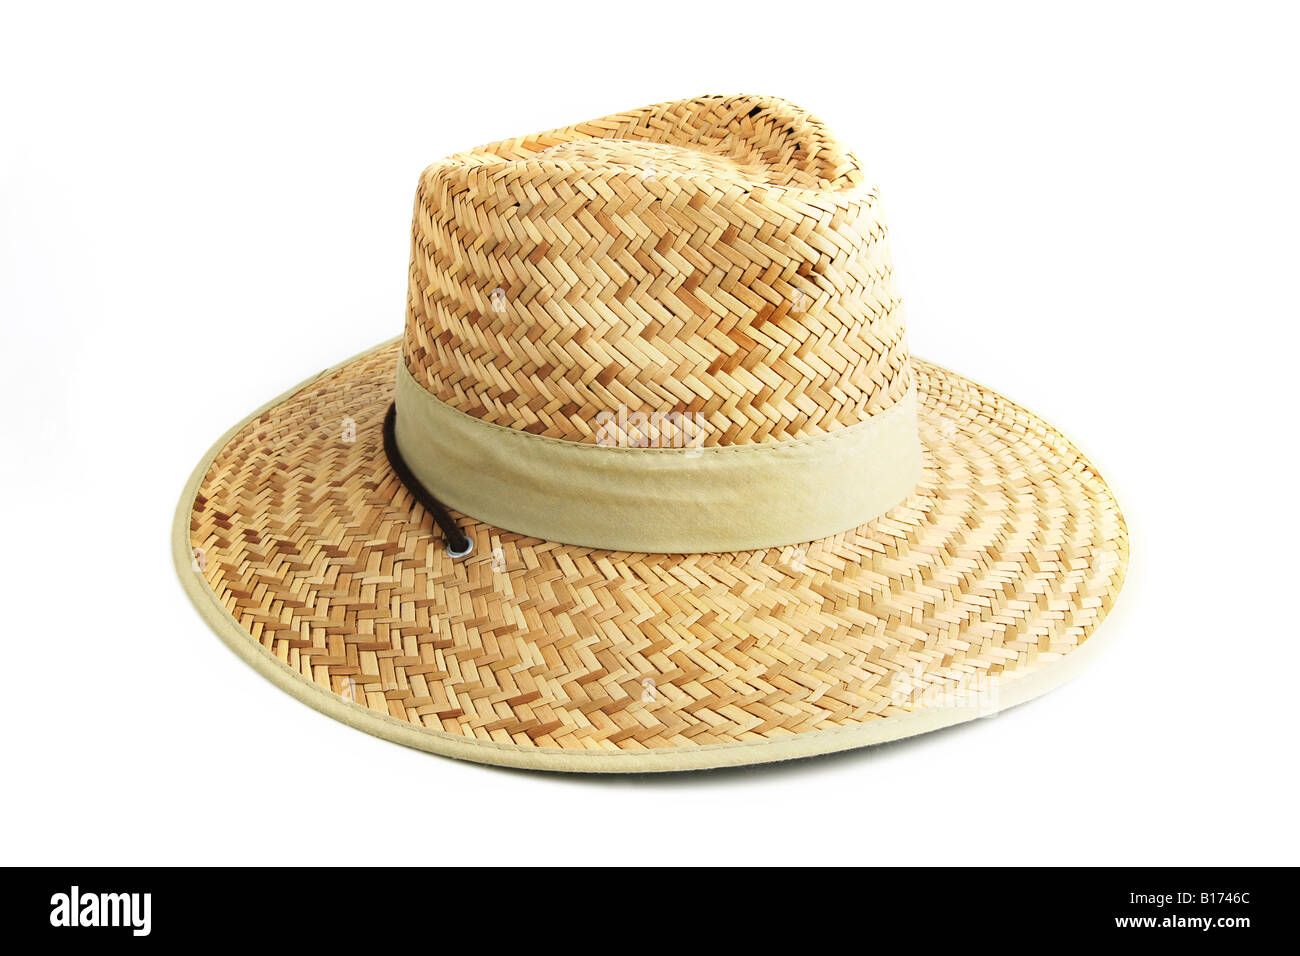 Straw hat on a white background Stock Photo